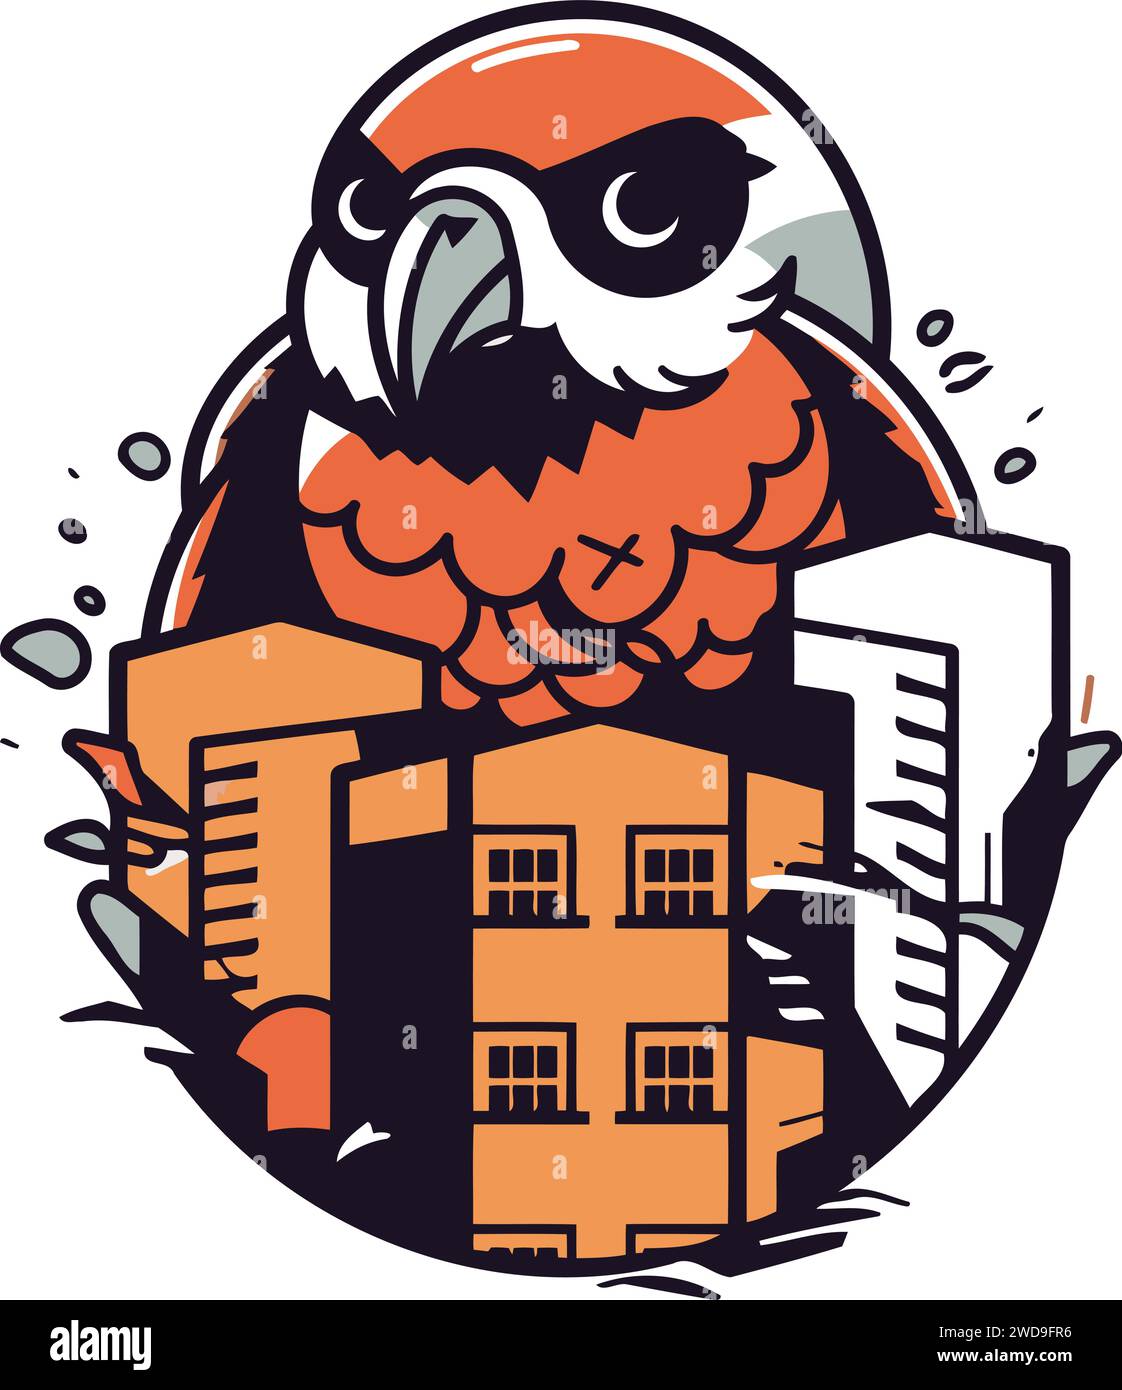 Cute parrot in a city. Vector illustration on white background. Stock Vector